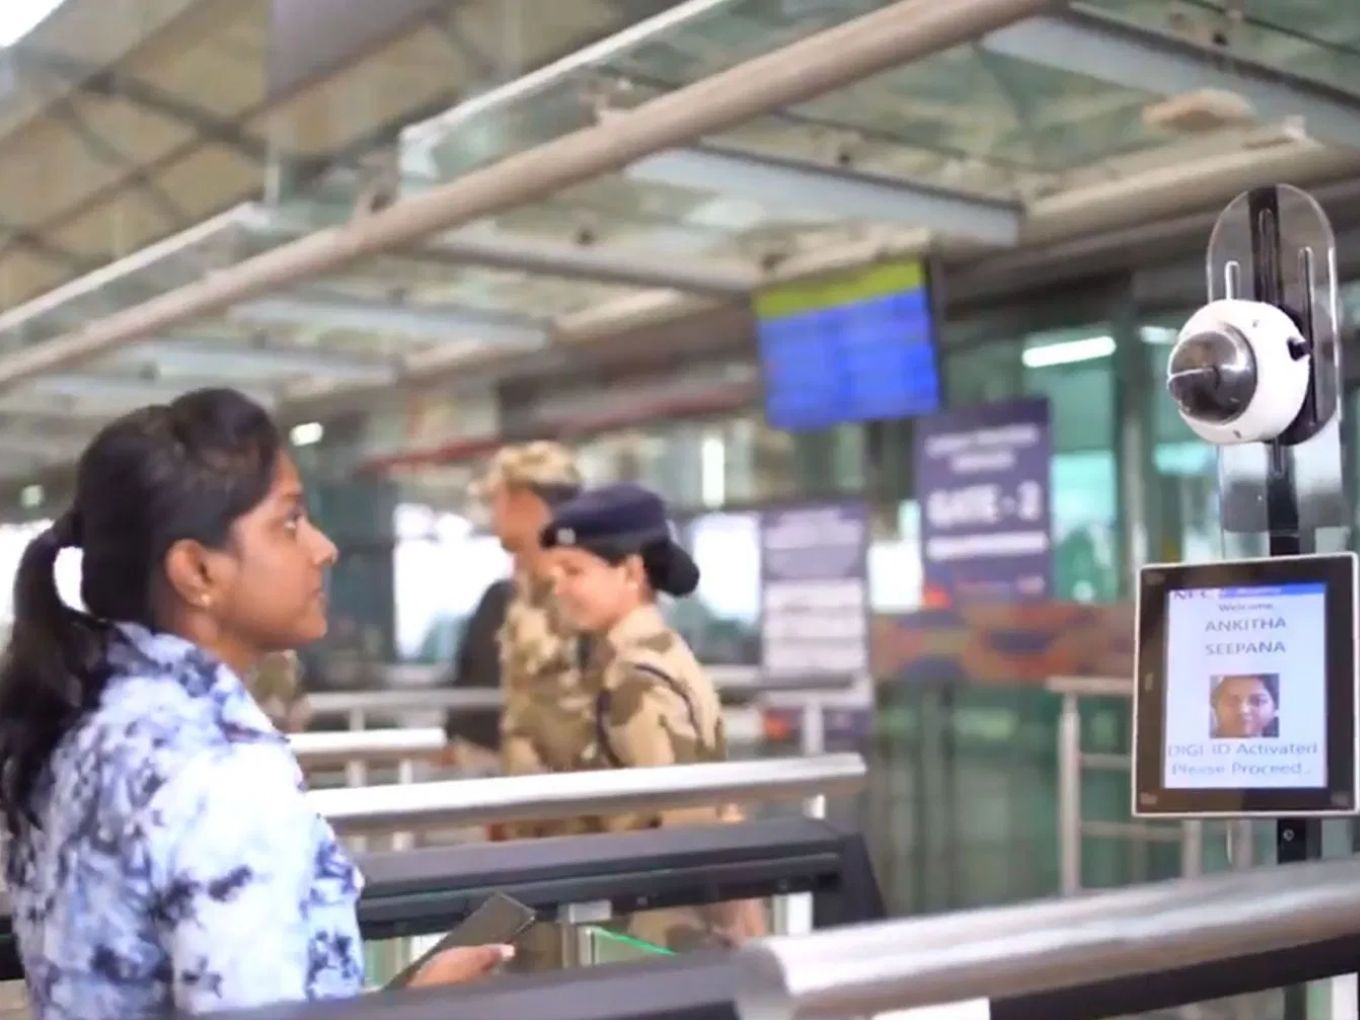 Airport Facial Recognition Data Will Be Deleted, Assures Govt